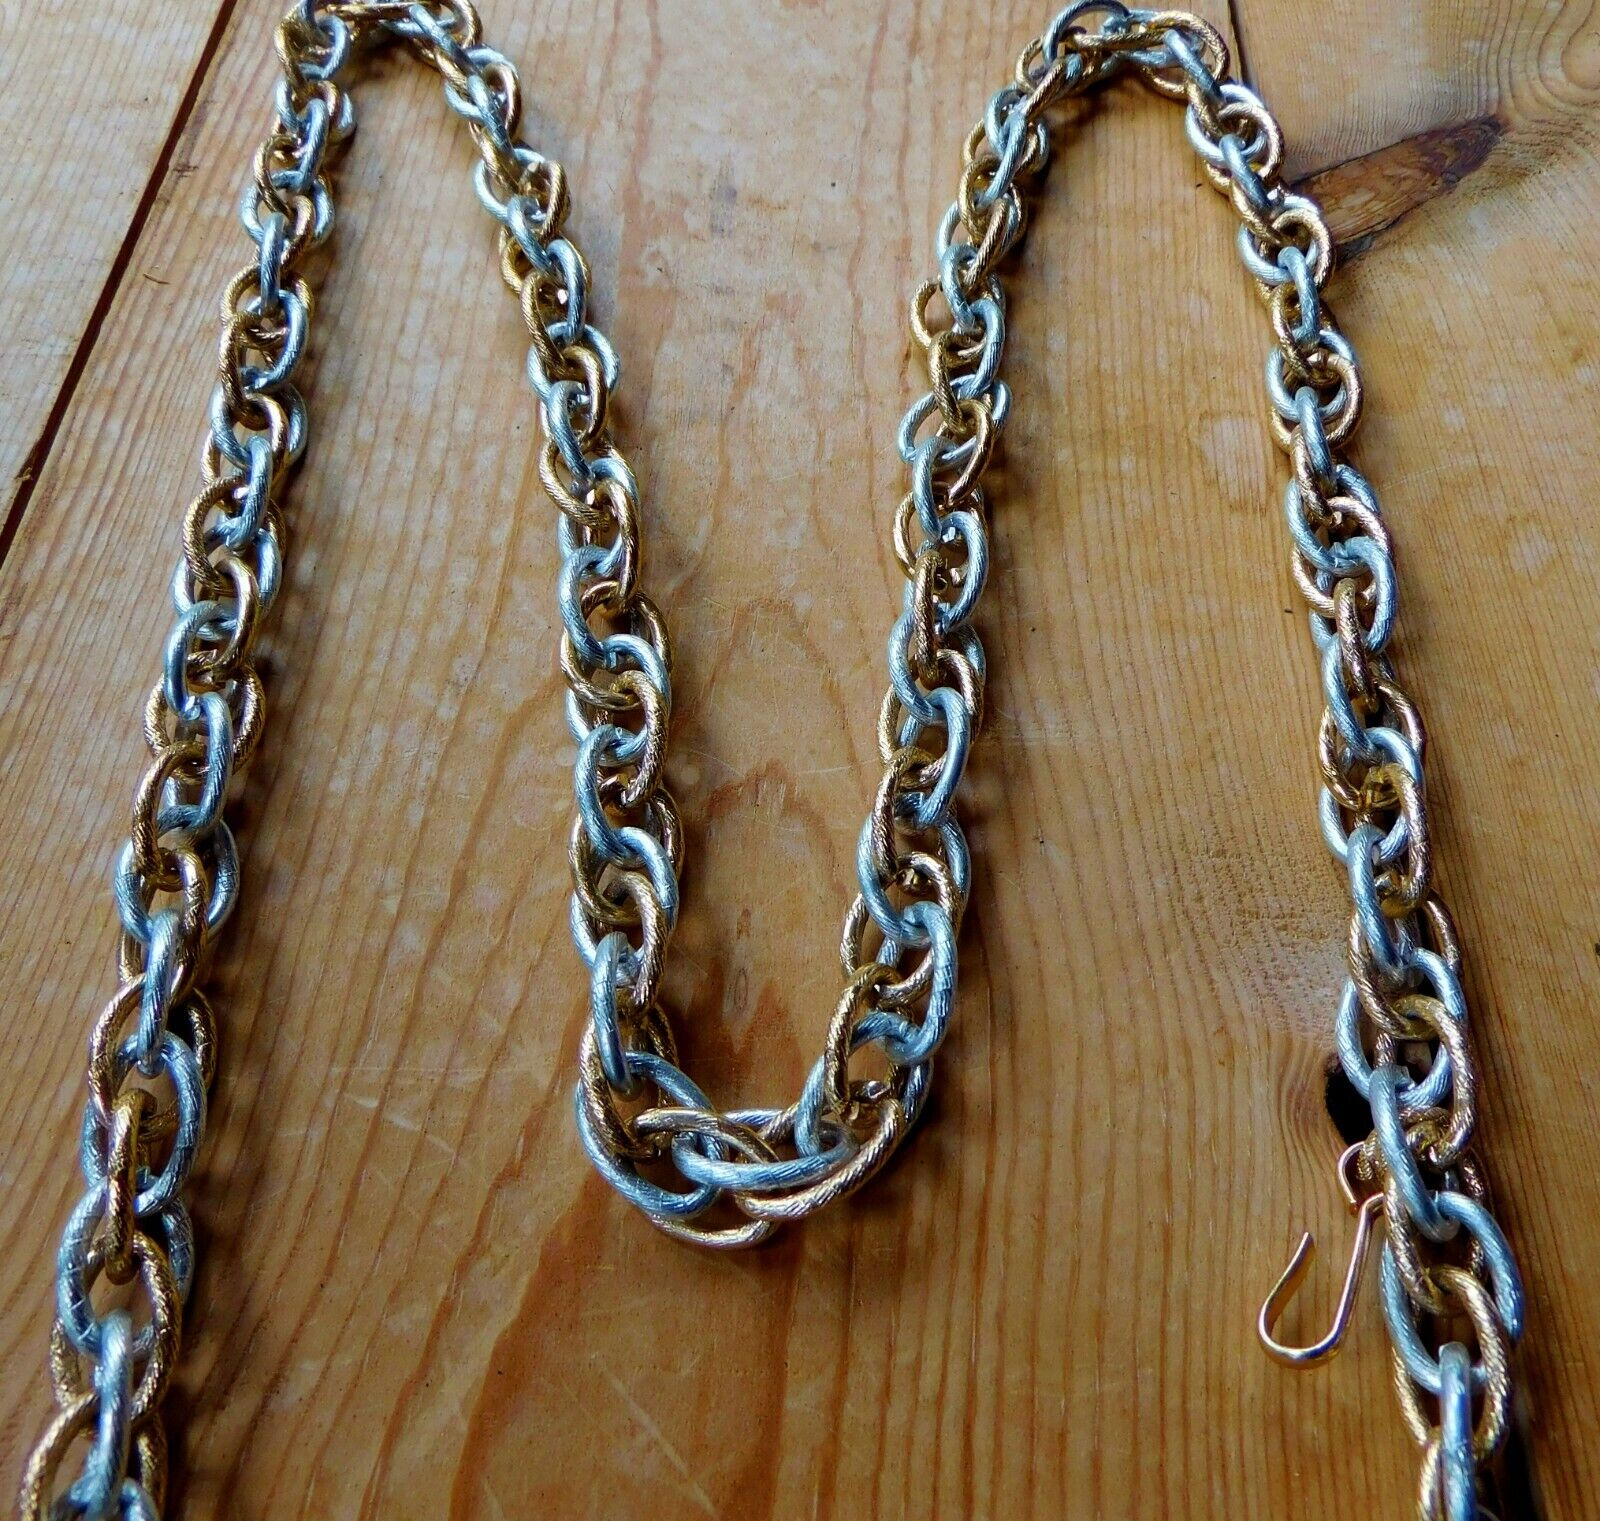 Gold and Silver tone chain belt - image 3